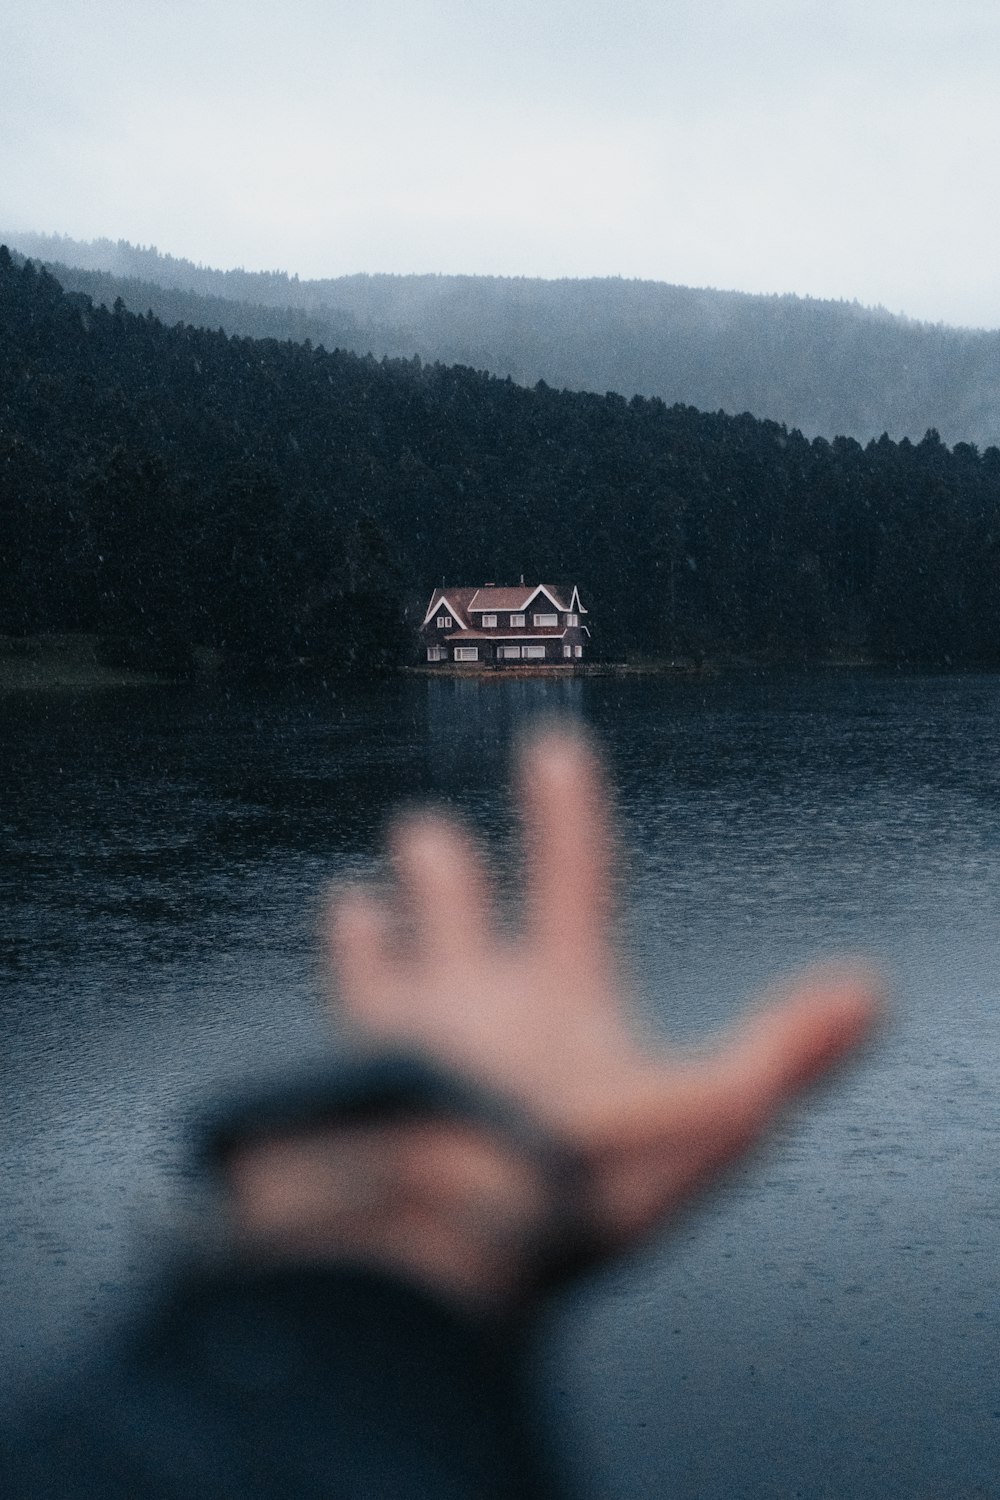 a hand is in front of a house on a lake